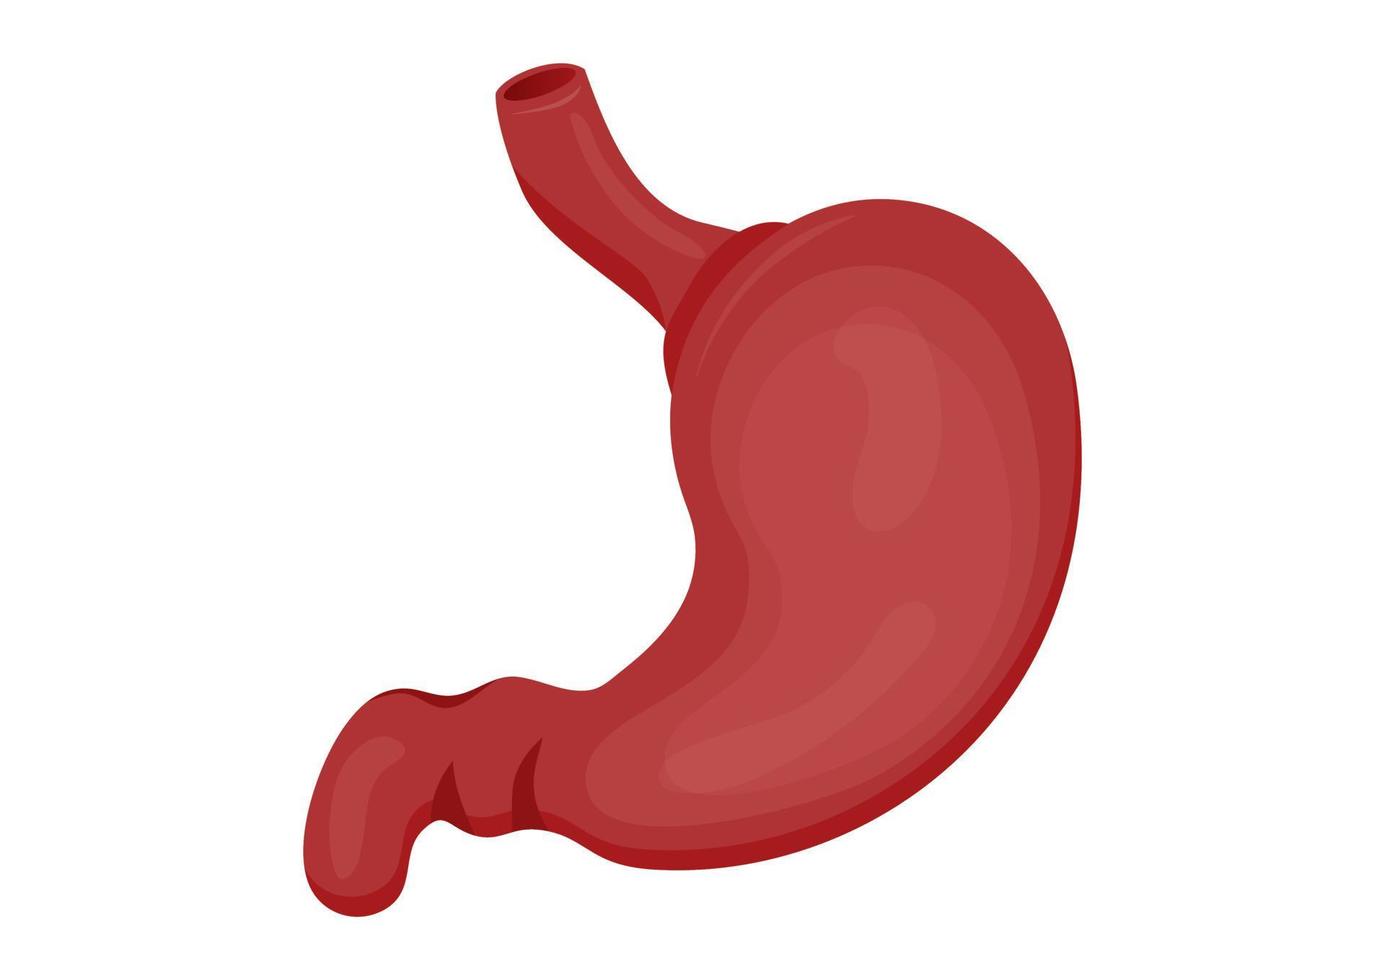 Human stomach organ isolated on white background. Stomach icon of color style design vector